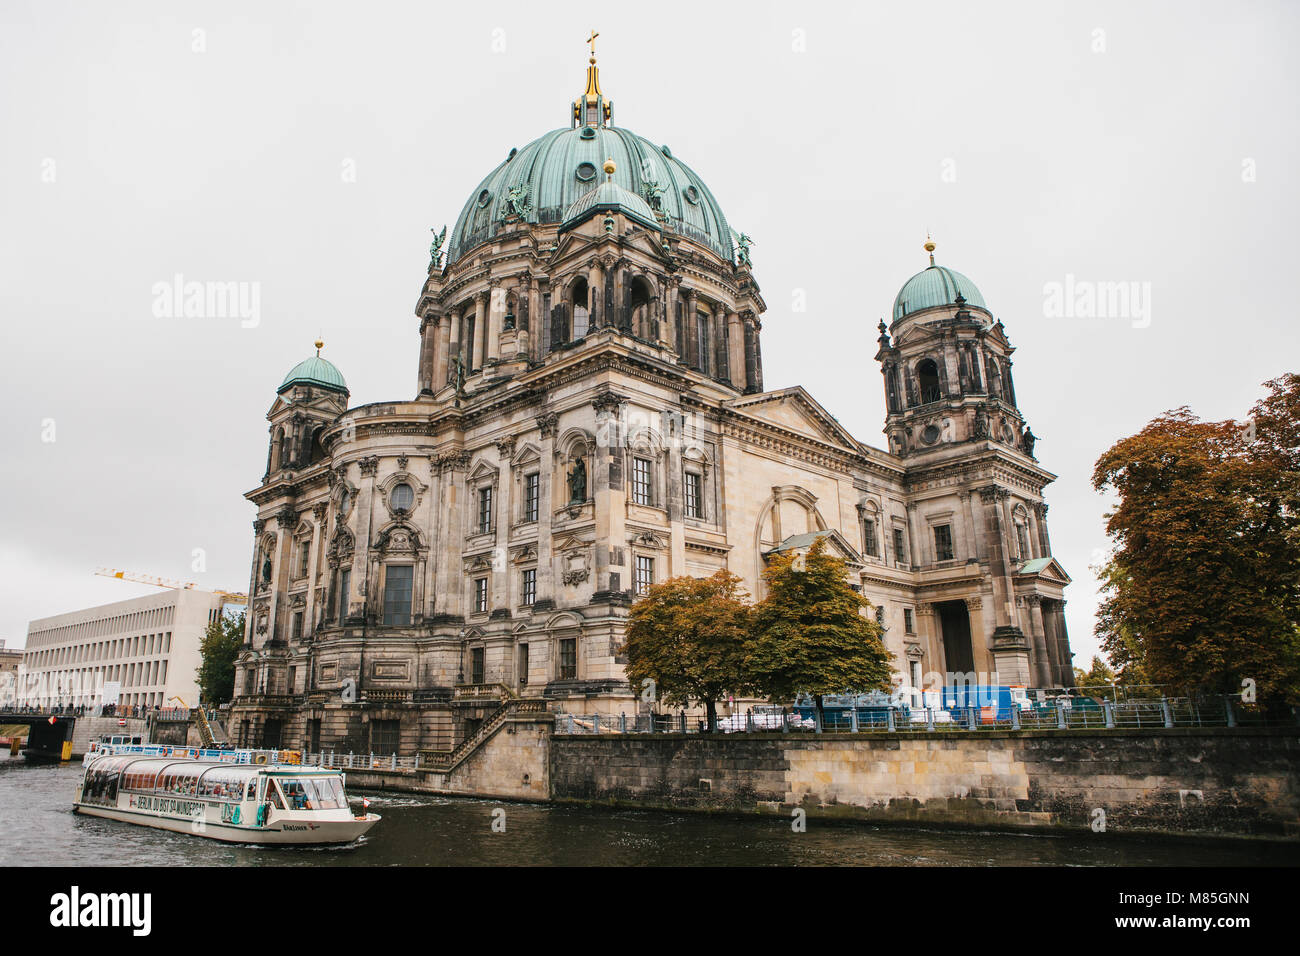 Berlin, October 1, 2017: Berlin Cathedral Berliner dom- beautiful old building with green dome next to the river Spree and tourist boats Stock Photo